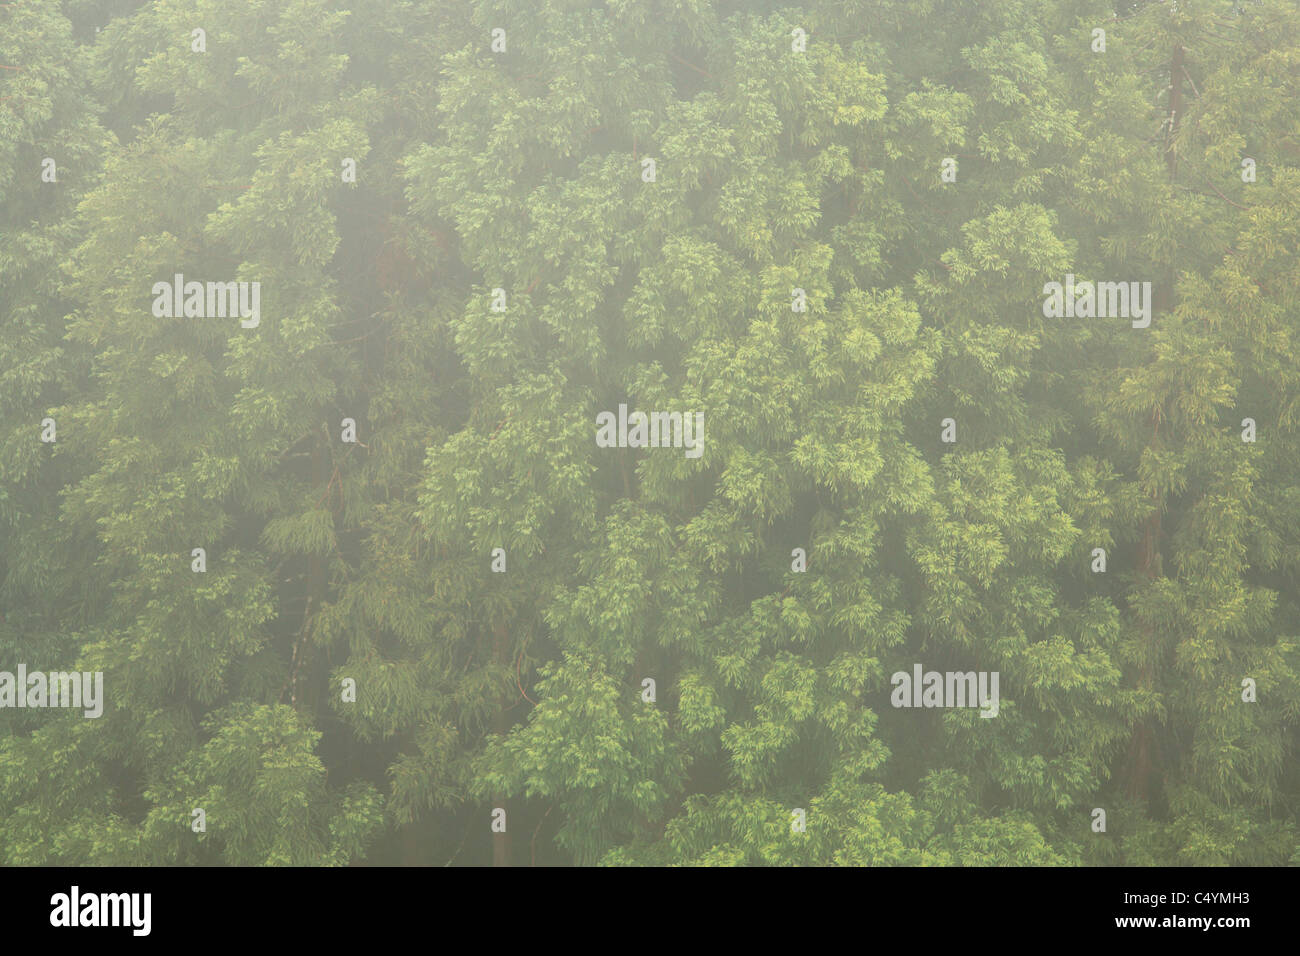 Japanese Cedar woods (Cryptomeria japonica), in a foggy day at the Azores islands. Stock Photo